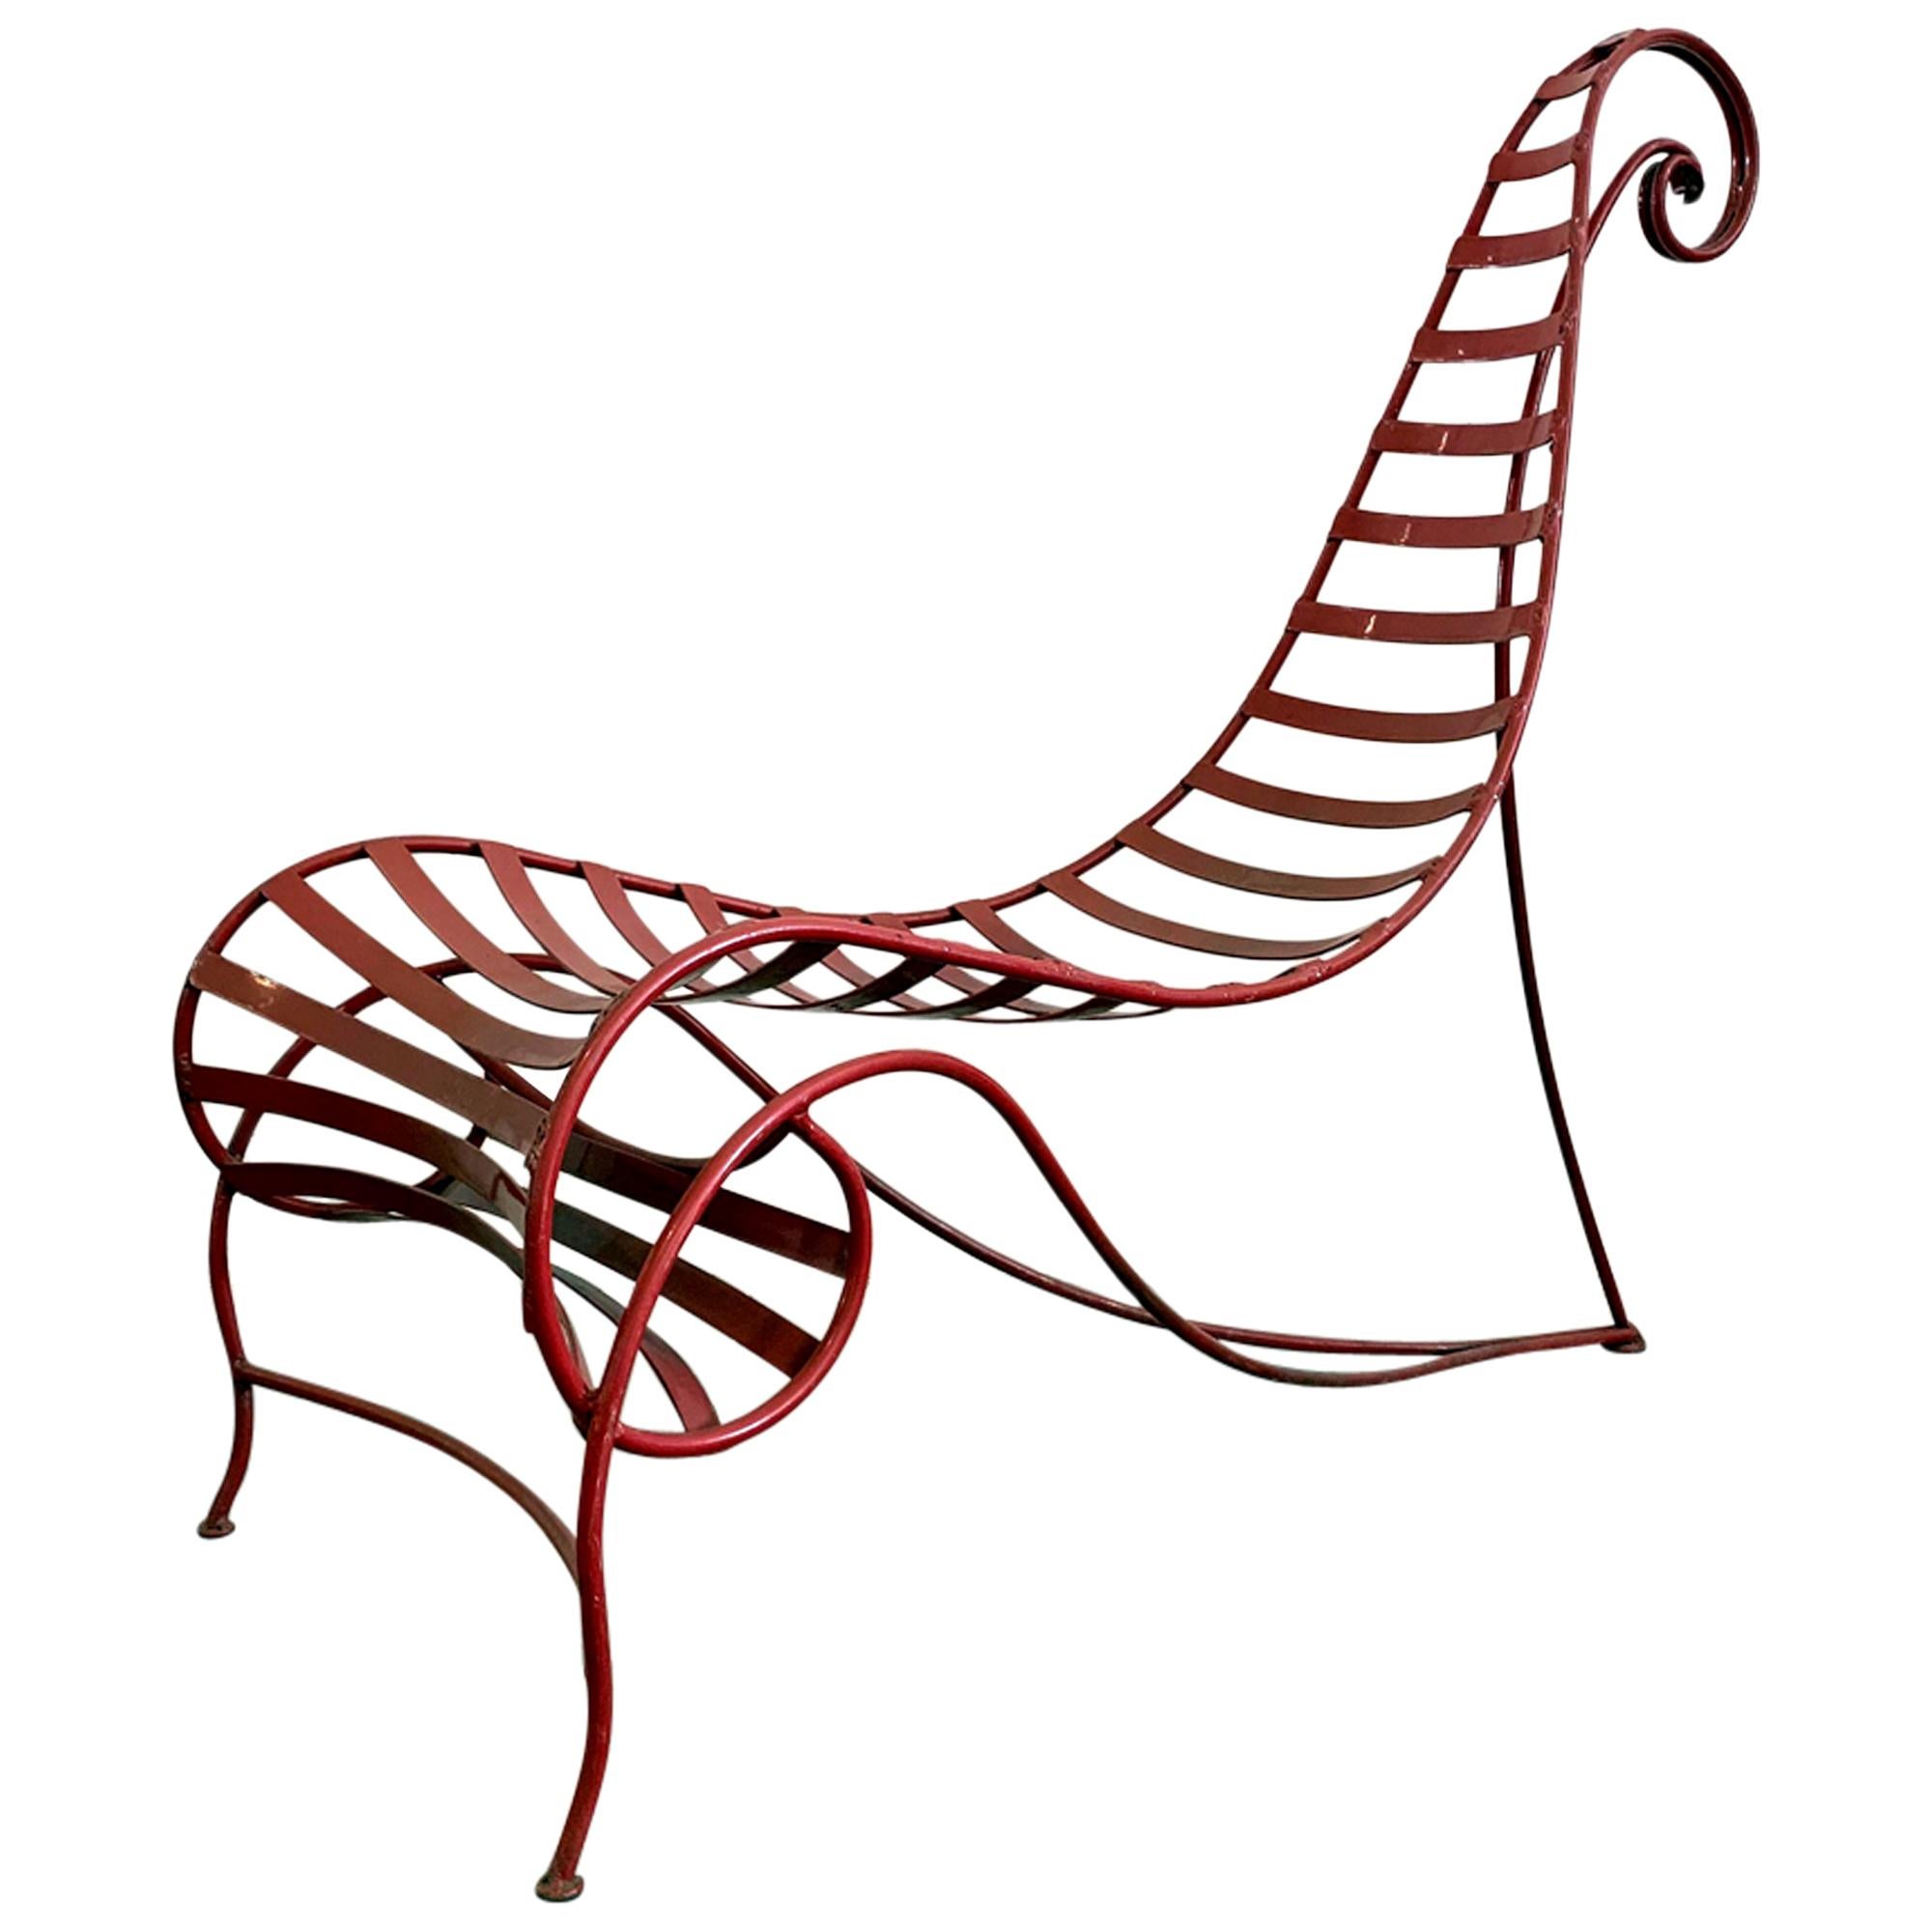 Iron Spine Chair Attributed to Andre Dubreuil